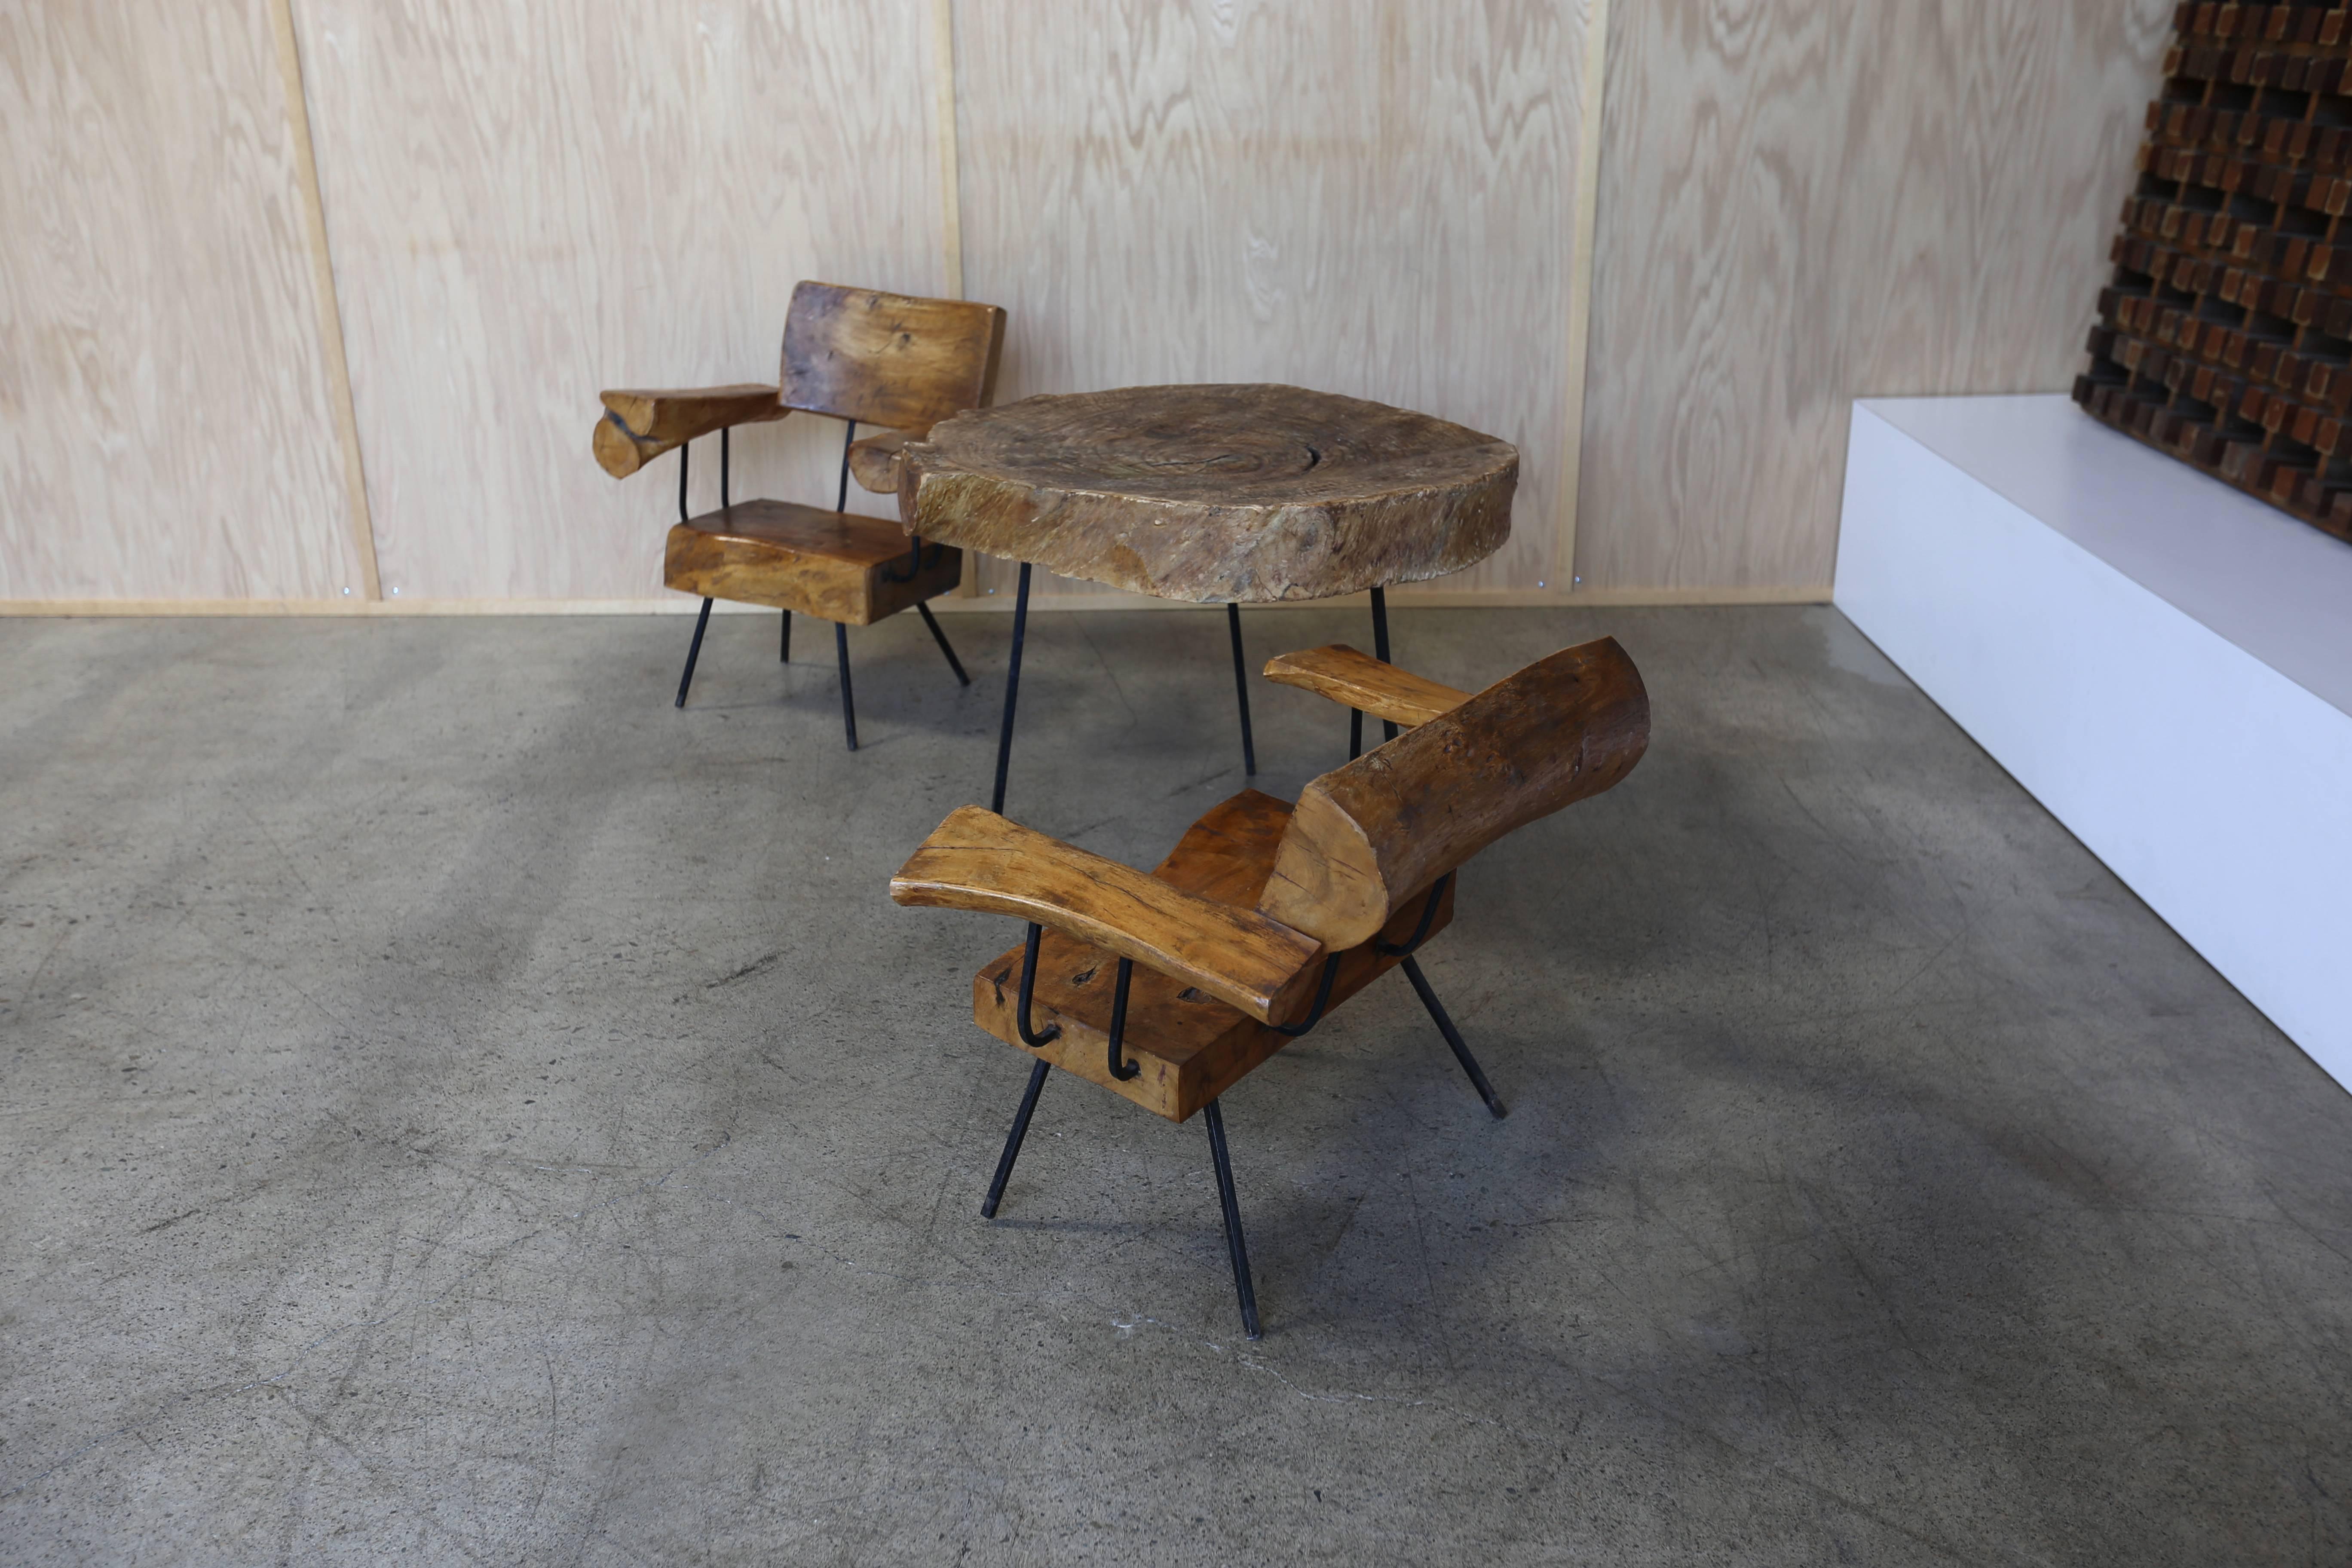 Primitive Wood Log Table and Chairs by Sabena 2